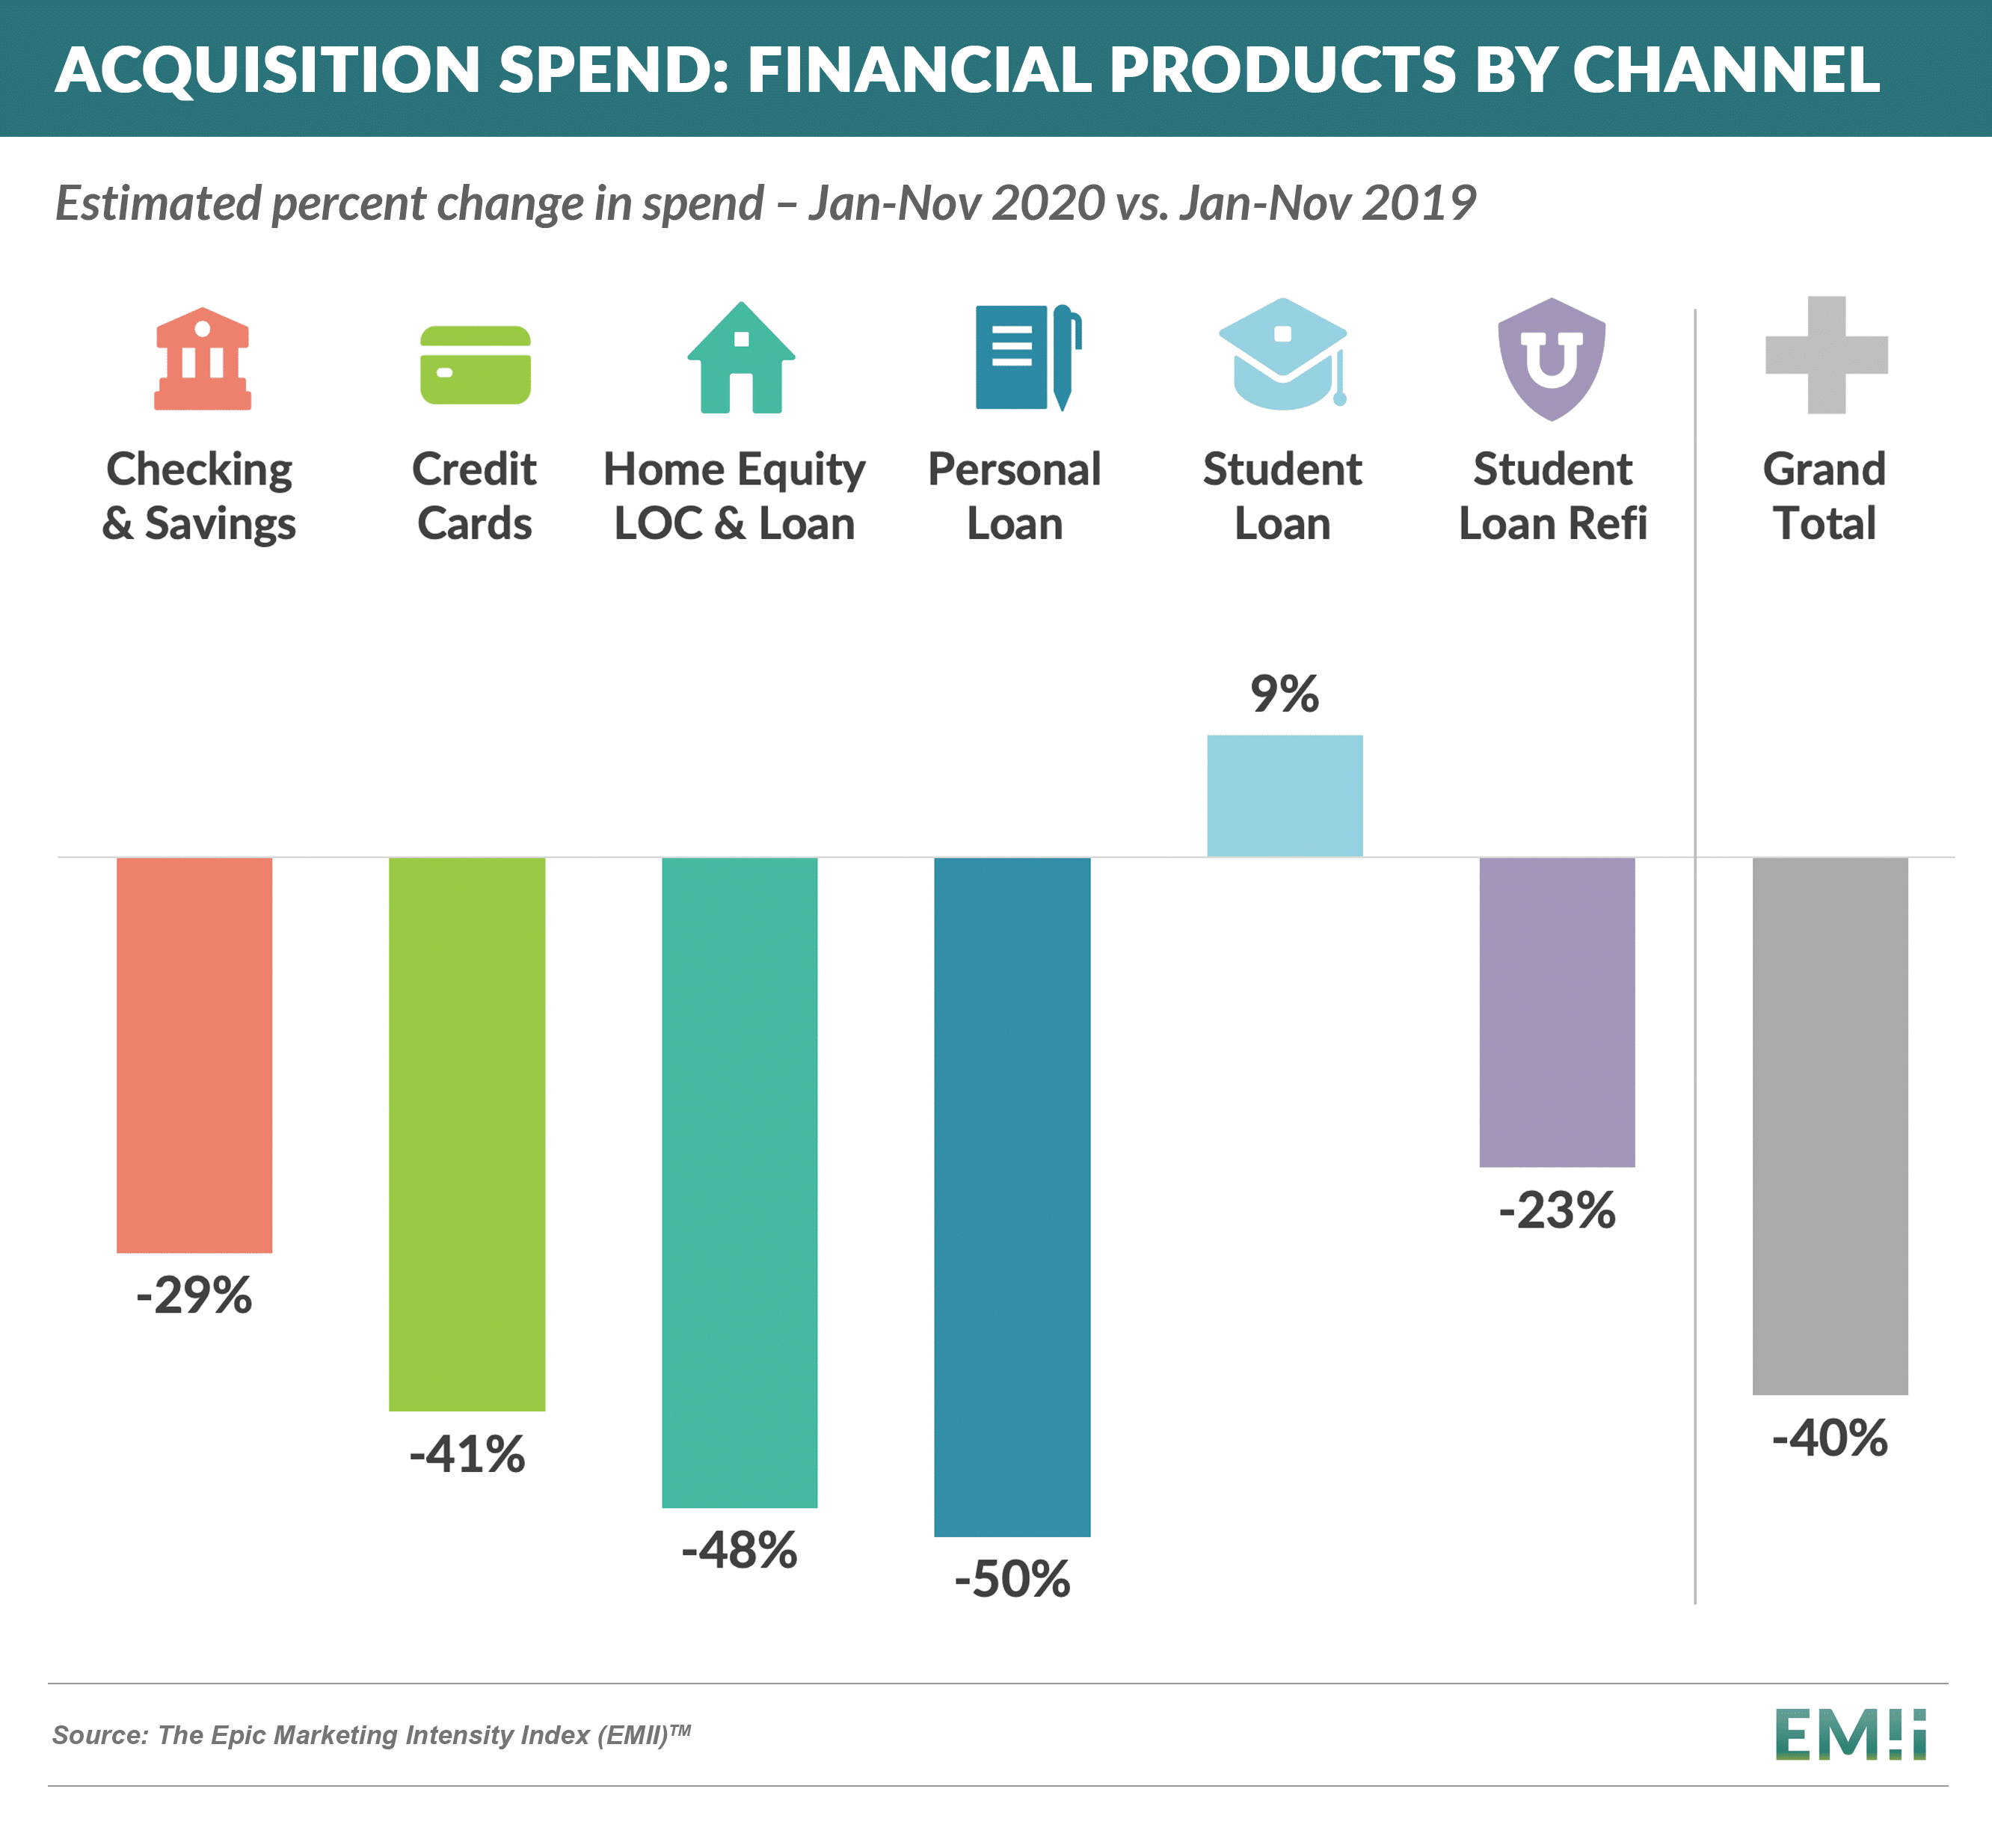 EMII - acquisition spend- FINANCE PRODUCTS BY CHANNEL